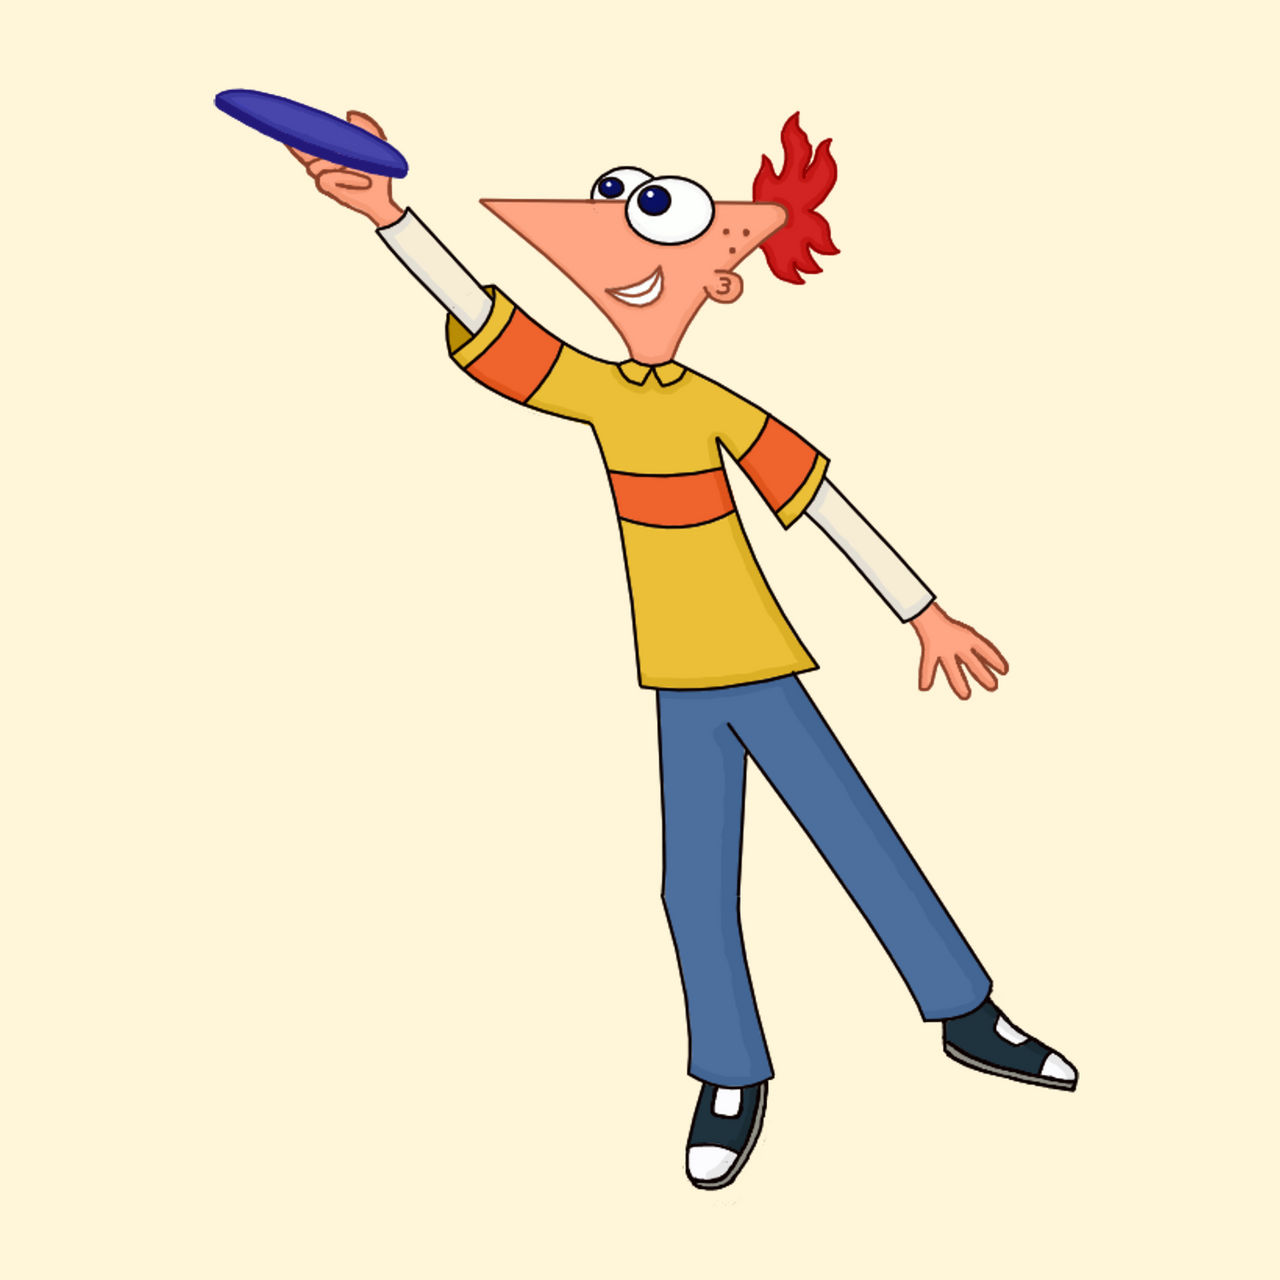 Phineas Flynn with a frisbee by vvvkkkmmm on DeviantArt